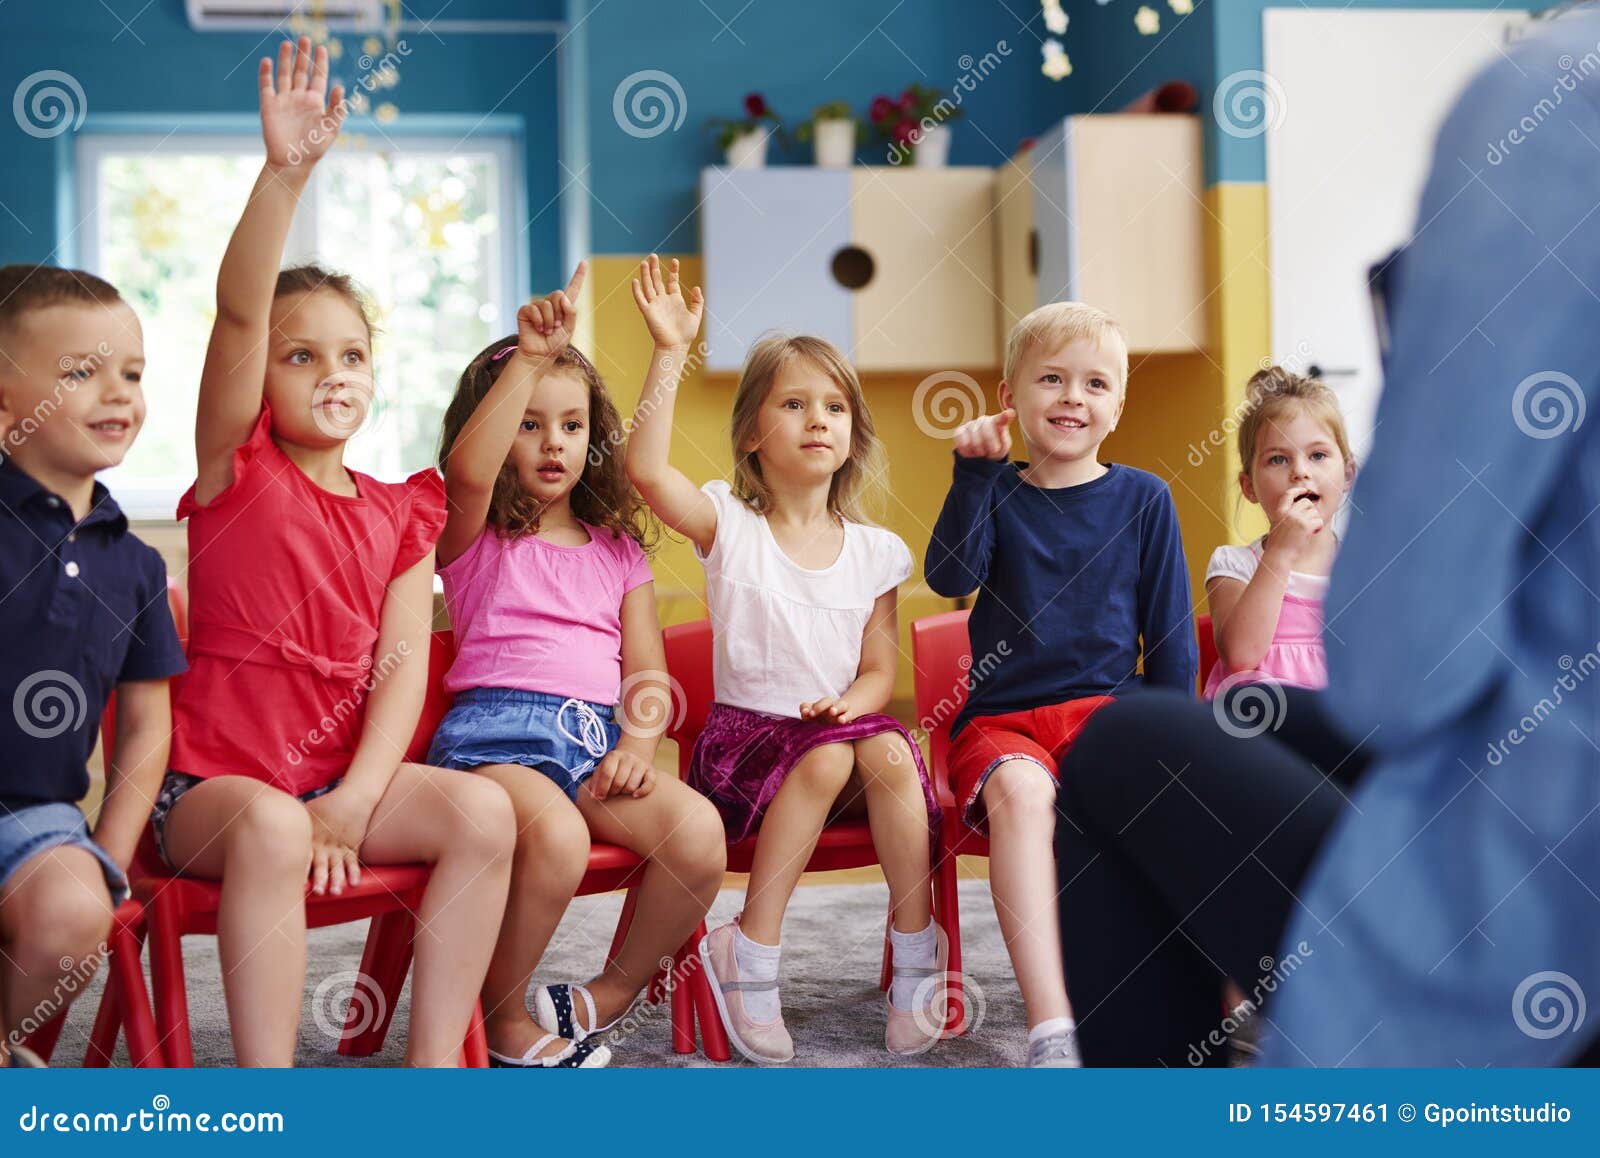 Group Of Preschool Children Answering A Question Stock